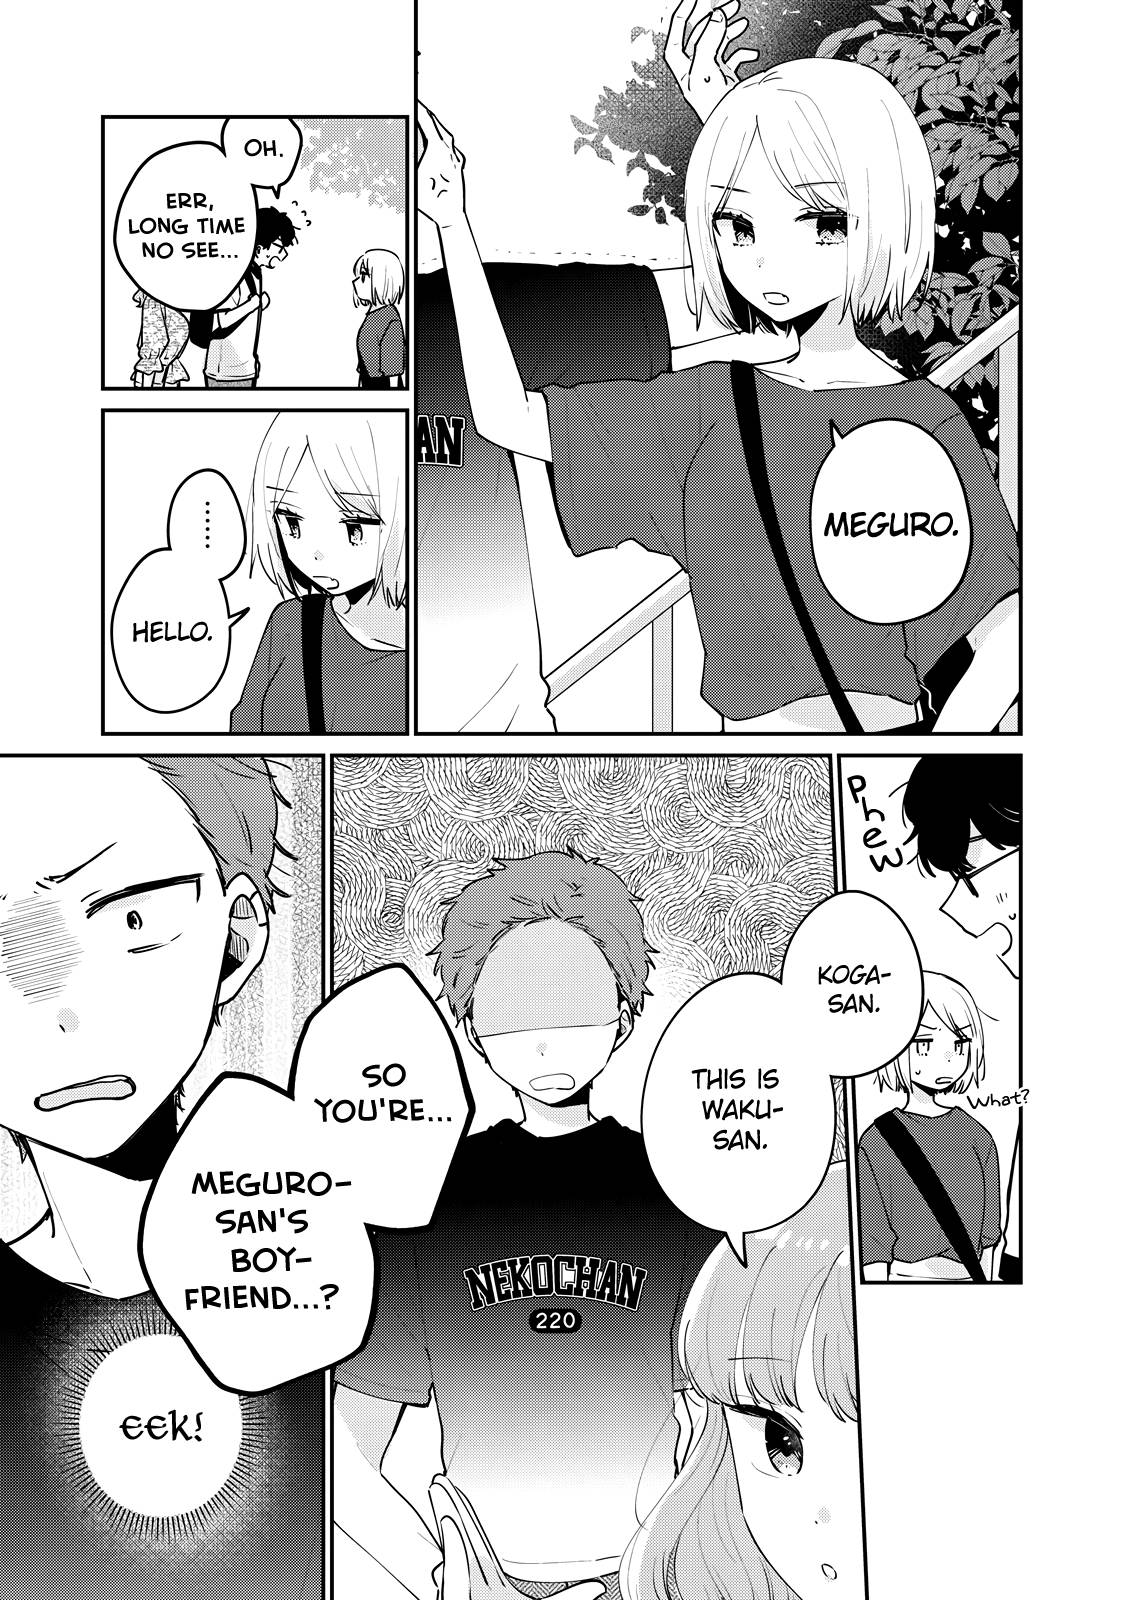 It's Not Meguro-san's First Time - chapter 64 - #4